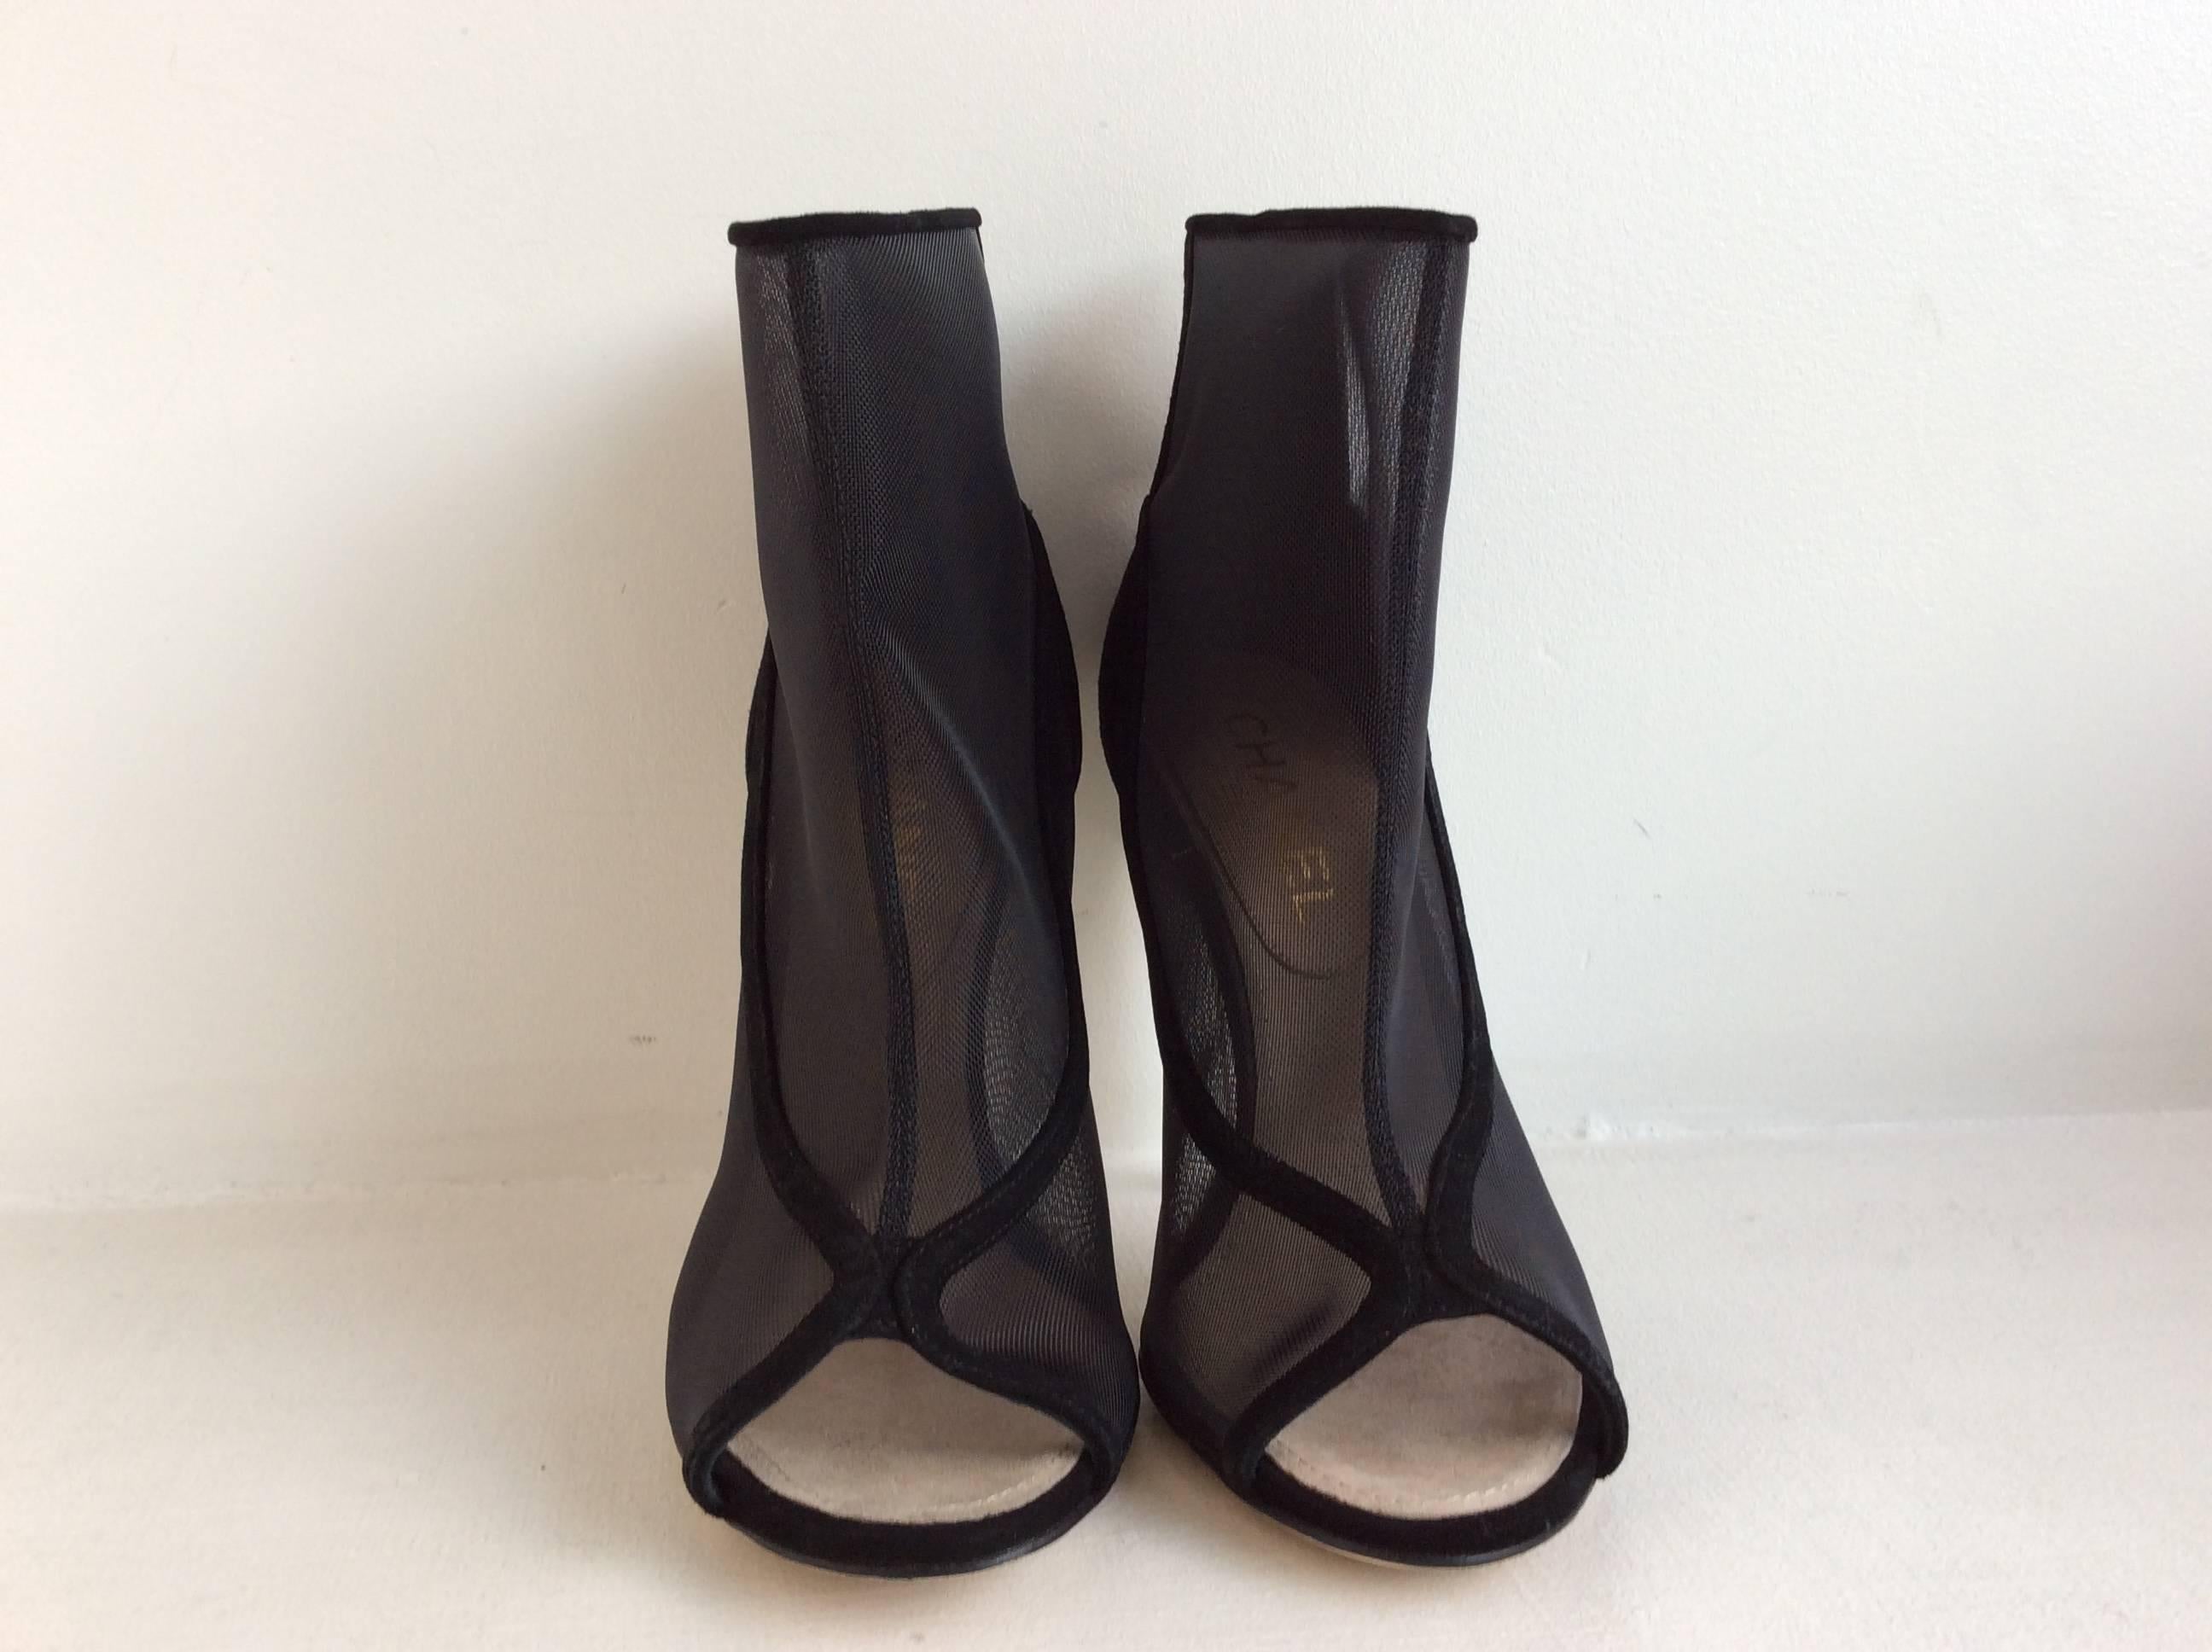 Chanel black nylon mesh and suede open toe booties in size 39 (8.5 USA).
The clear acrylic heel is 4.5 inches. The booties back is in black suede with two small gold toned CC on each of the outer upper part. For easy wear they have a 4 inches zipper